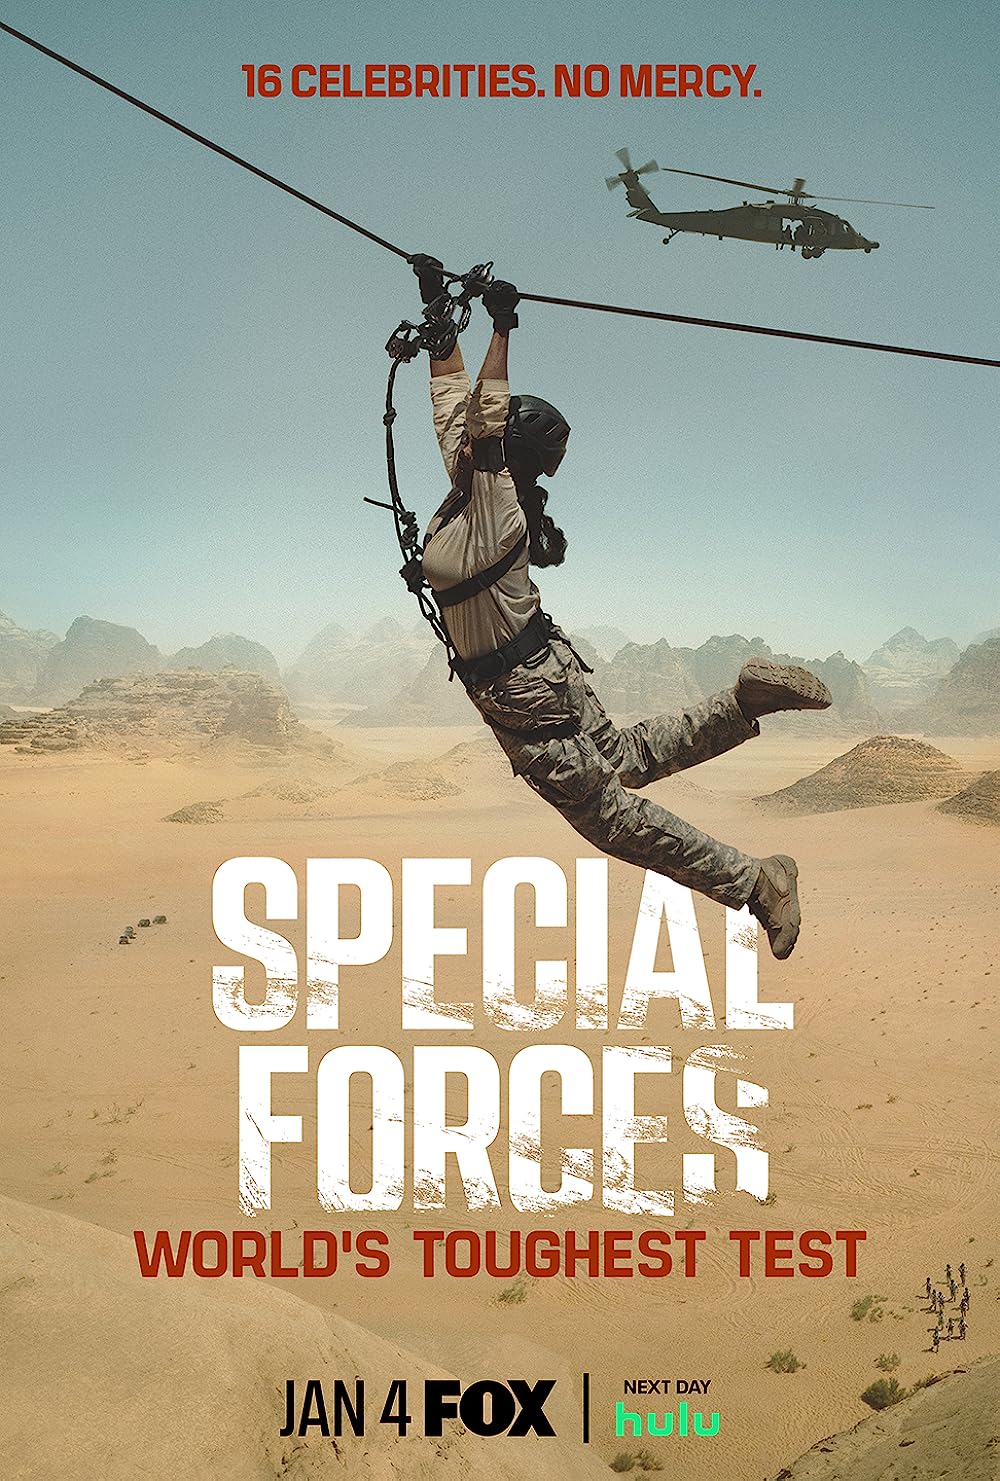 Coming September 25 to FOX - Season 2 of "Special Forces: World's Toughest Test"